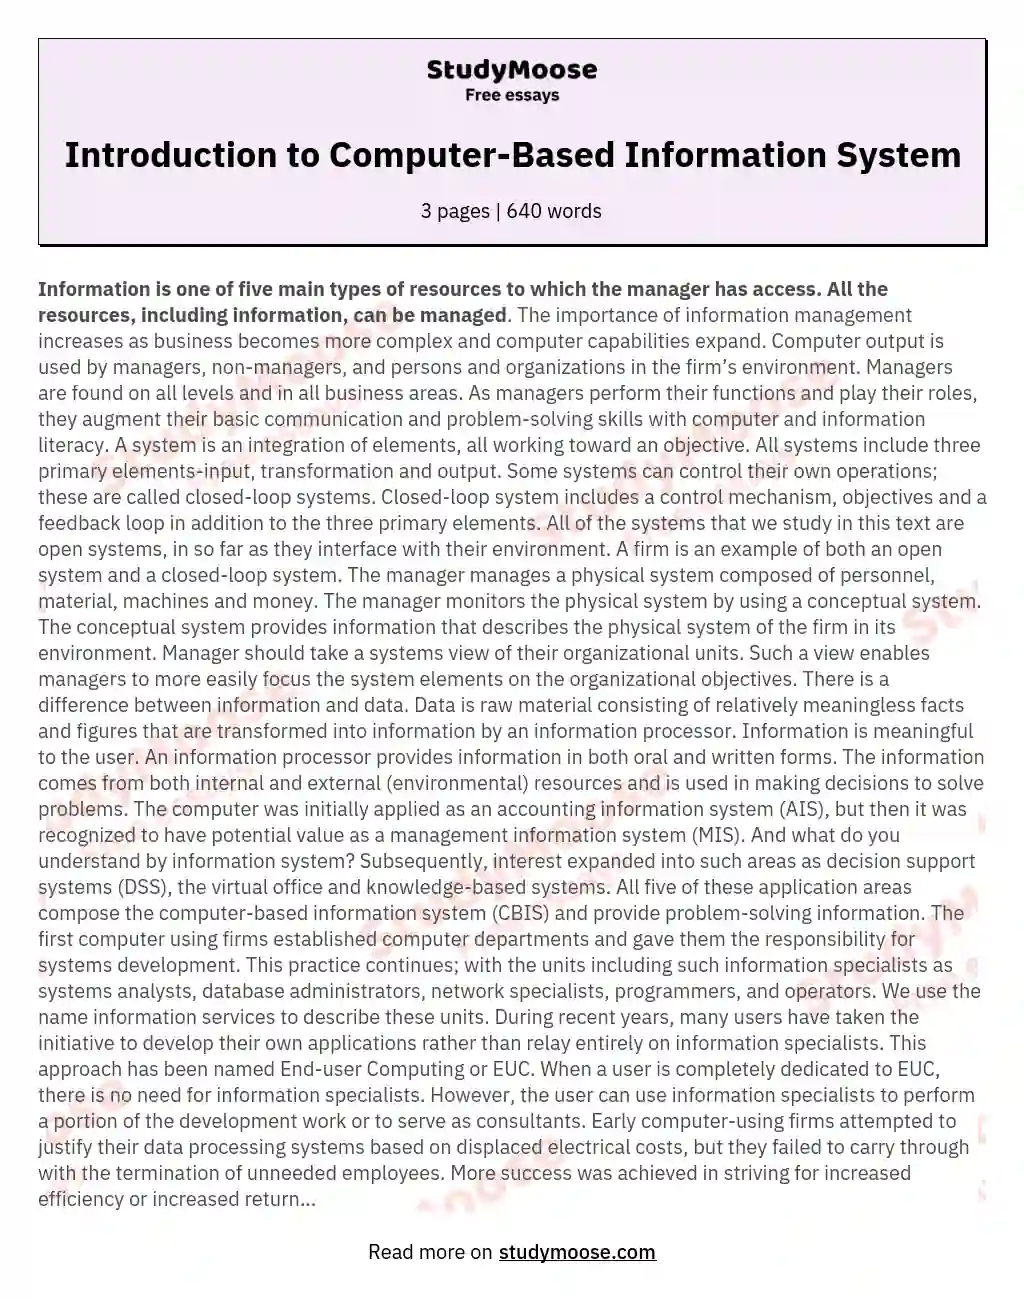 Introduction to Computer-Based Information System essay